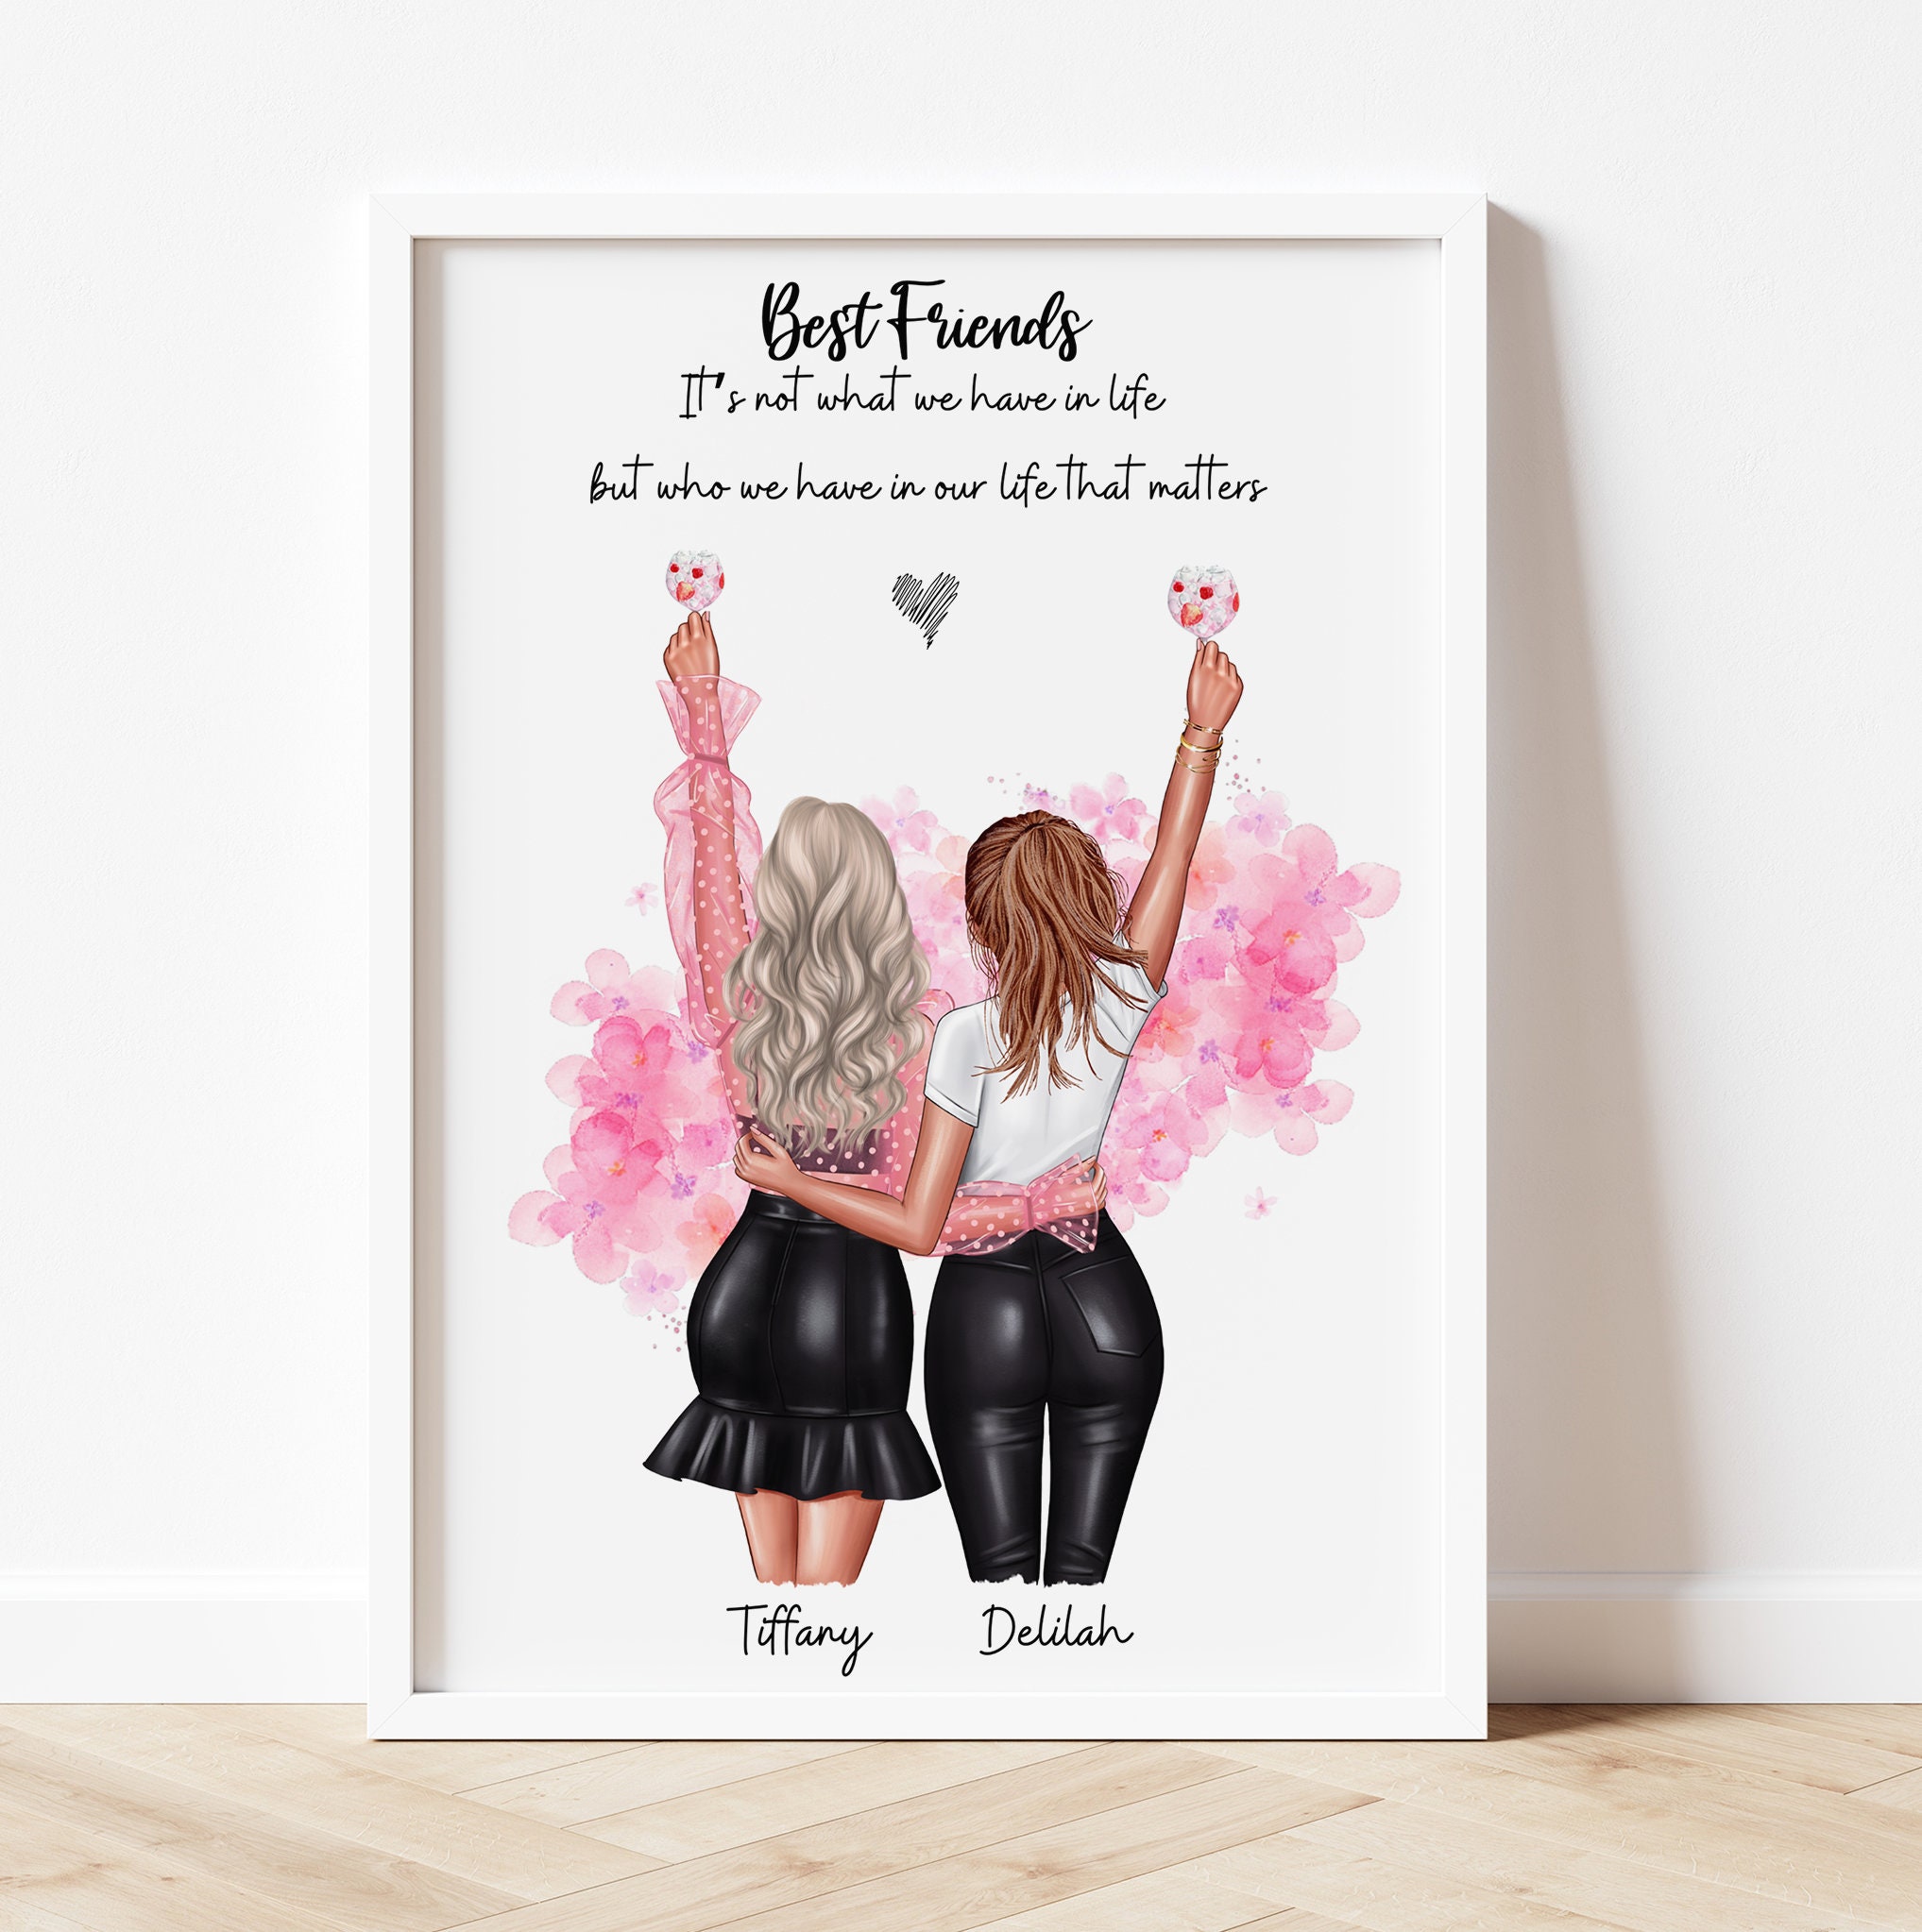 Best Friend Her, Wall Etsy Friend, - Gift Quote Gift Print, Bestie Gifts, Gift, Friend Personalised Art, Print, for Best Birthday for